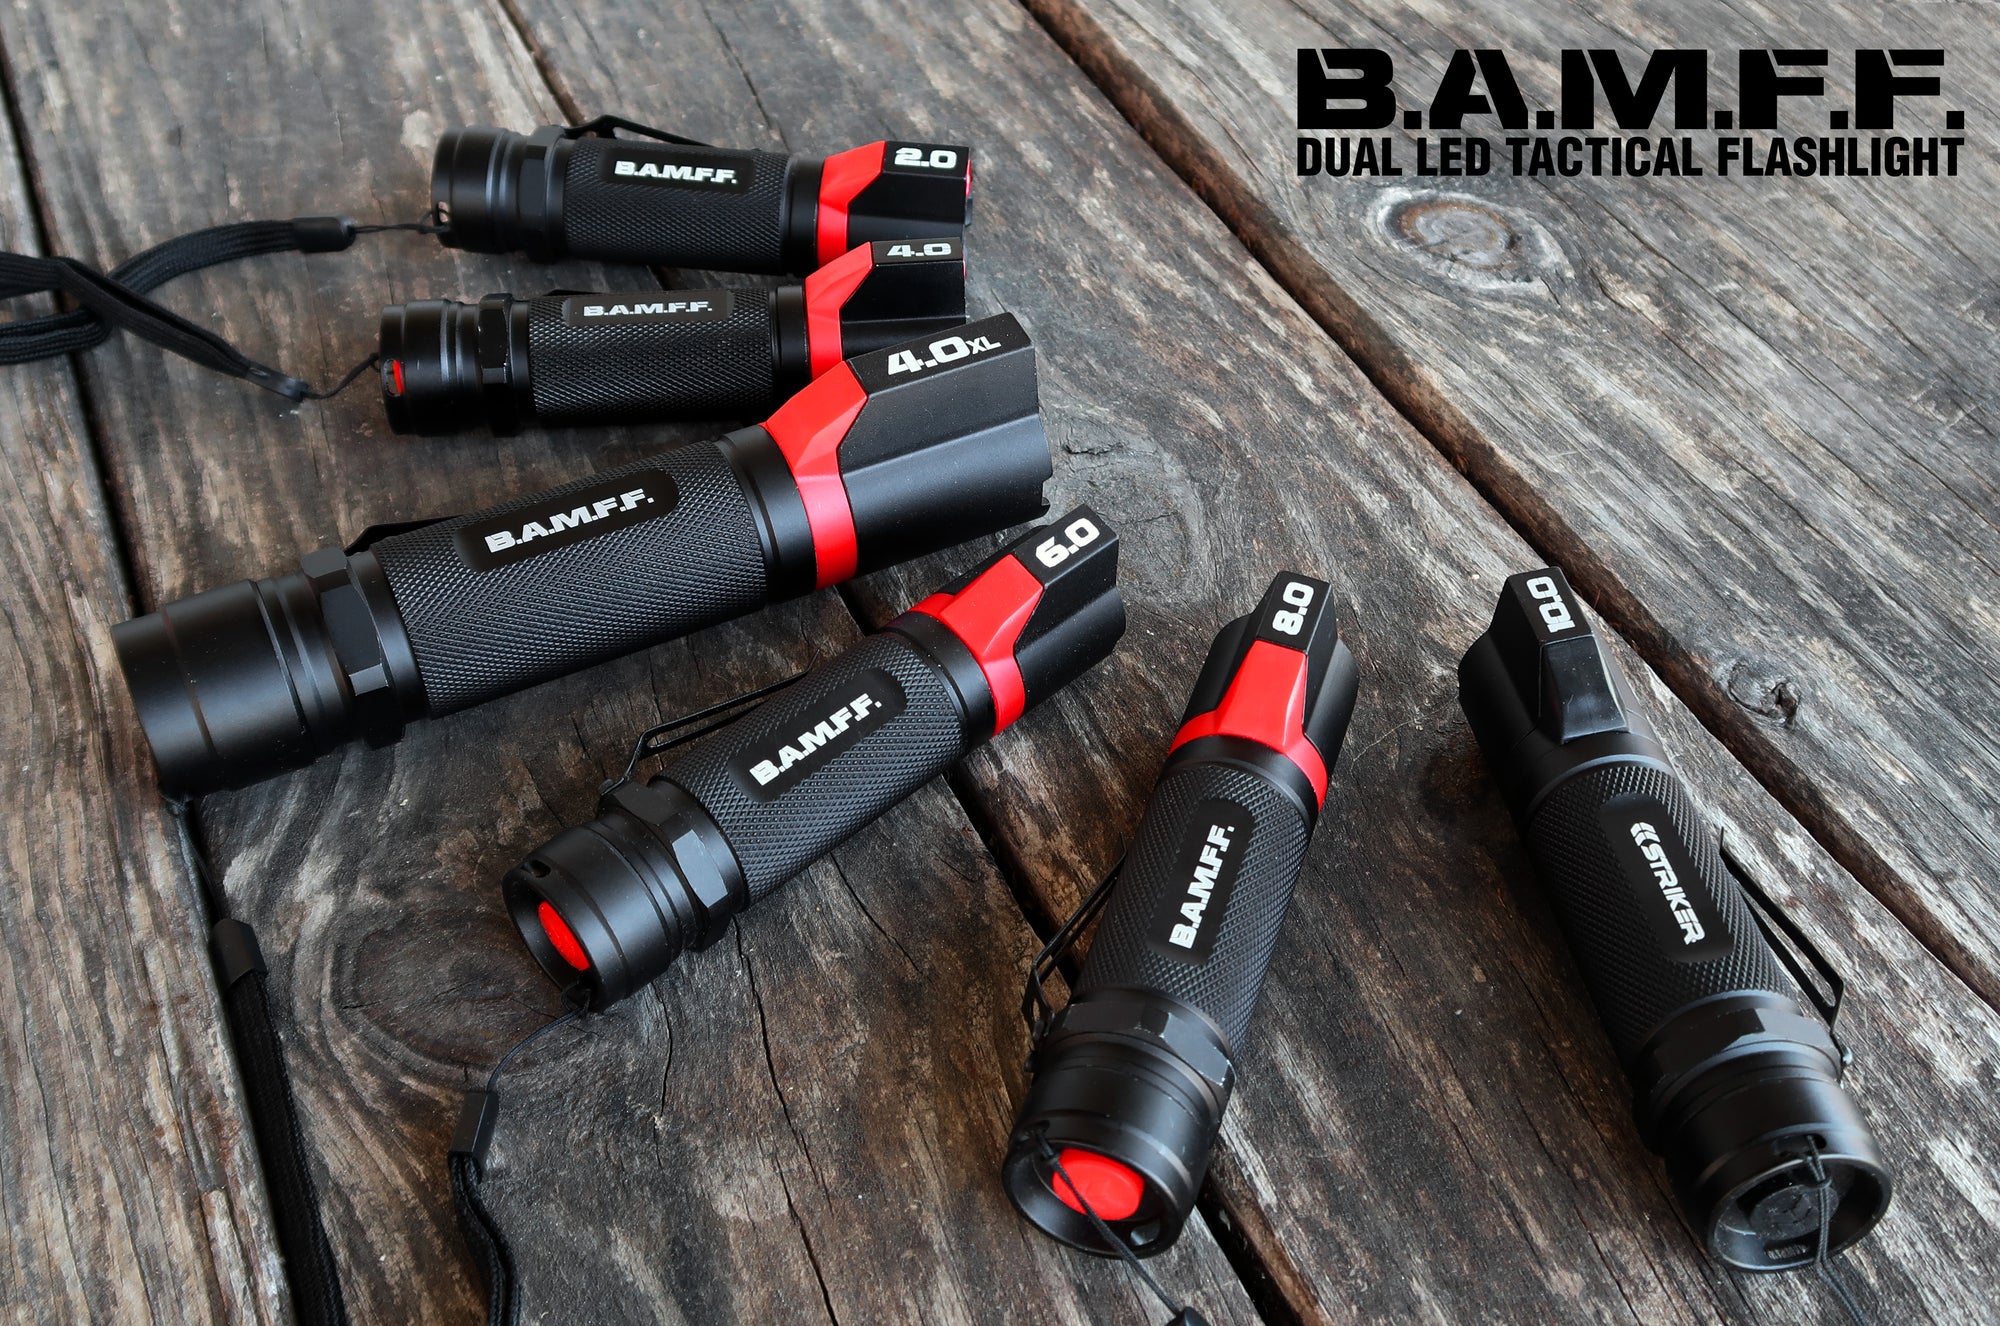 What Is The Best Tactical Flashlight?